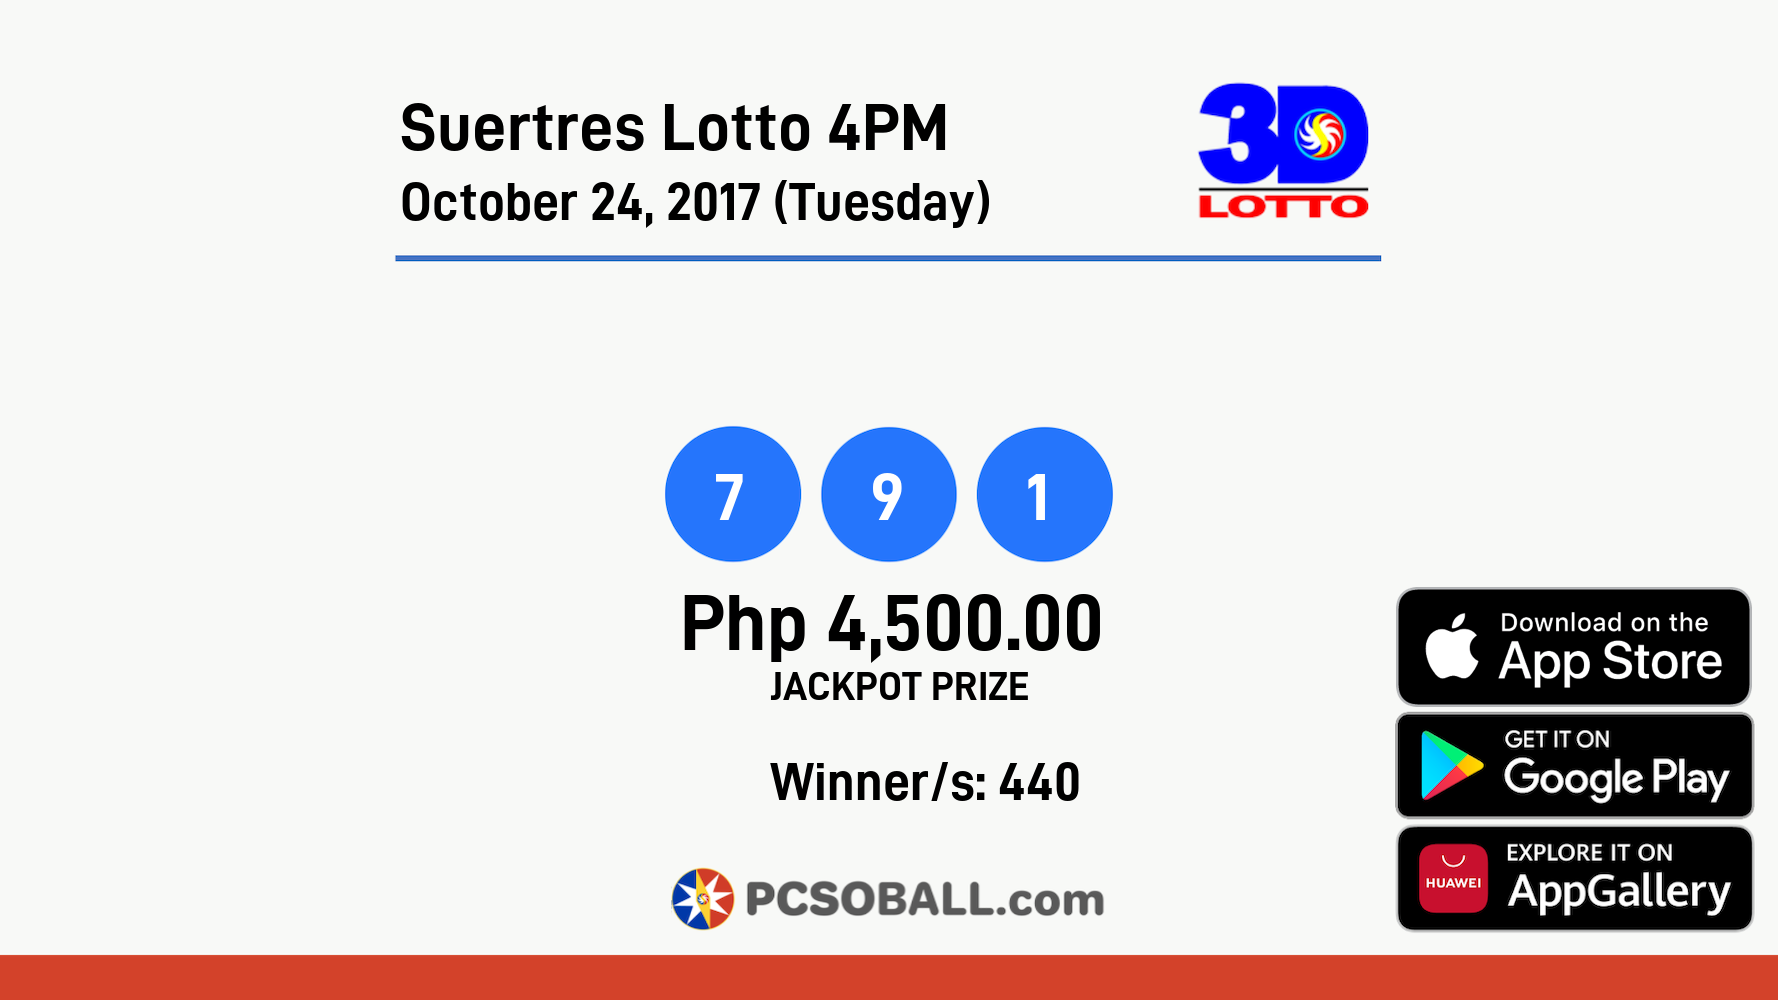 Suertres Lotto 4PM October 24, 2017 (Tuesday) Result